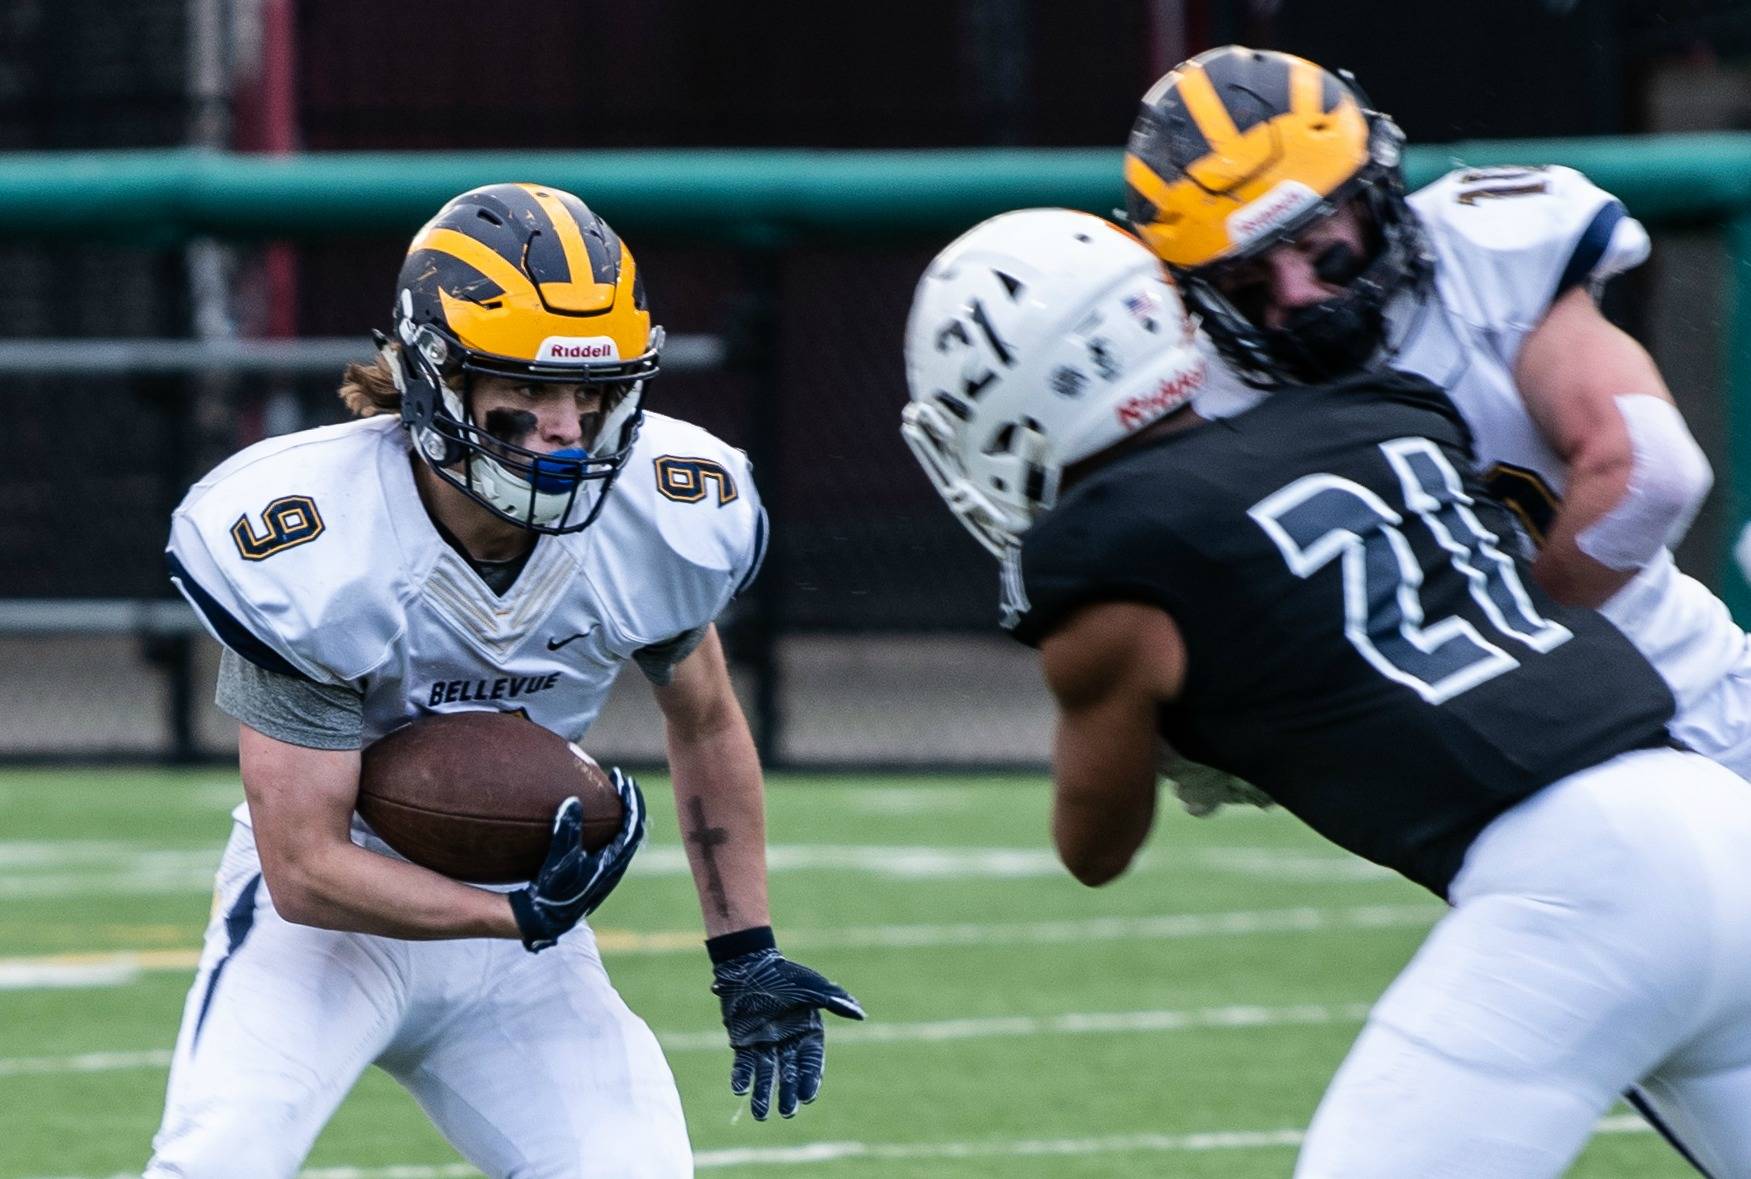 Bellevue’s season ends in 3A state football semifinals